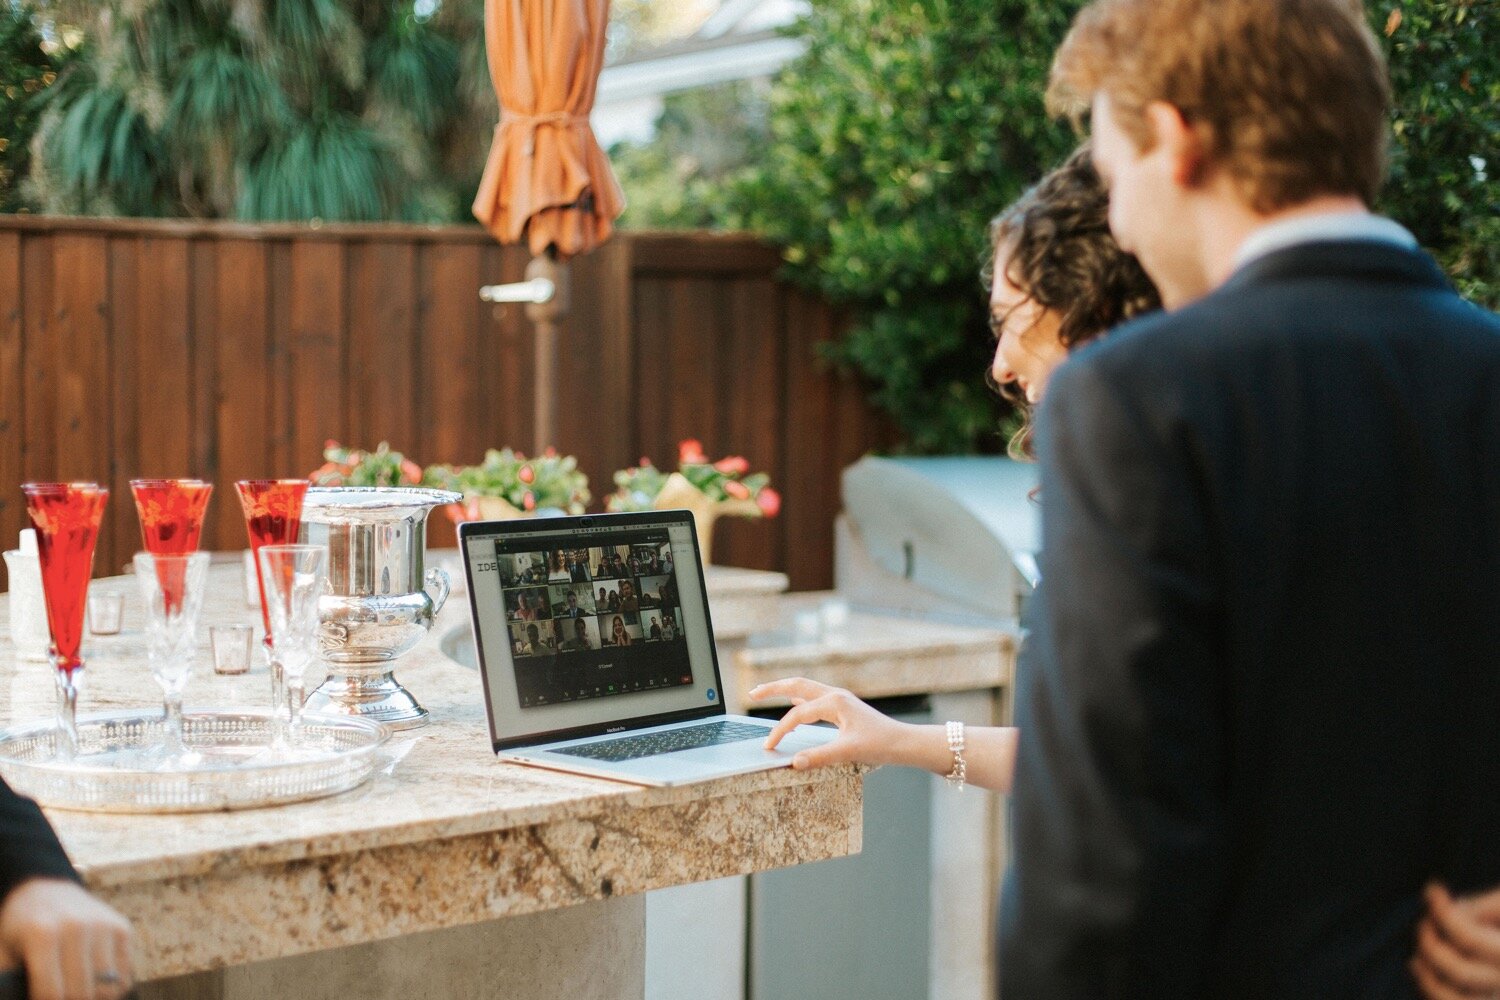  a common sight at a Coronavirus elopement in 2020, the bride and groom say hello to family and friends tuning into their wedding ceremony via Zoom live stream. Lilia &amp; Jack were married in Jack’s parents’ backyard in Los Angeles, and their weddi